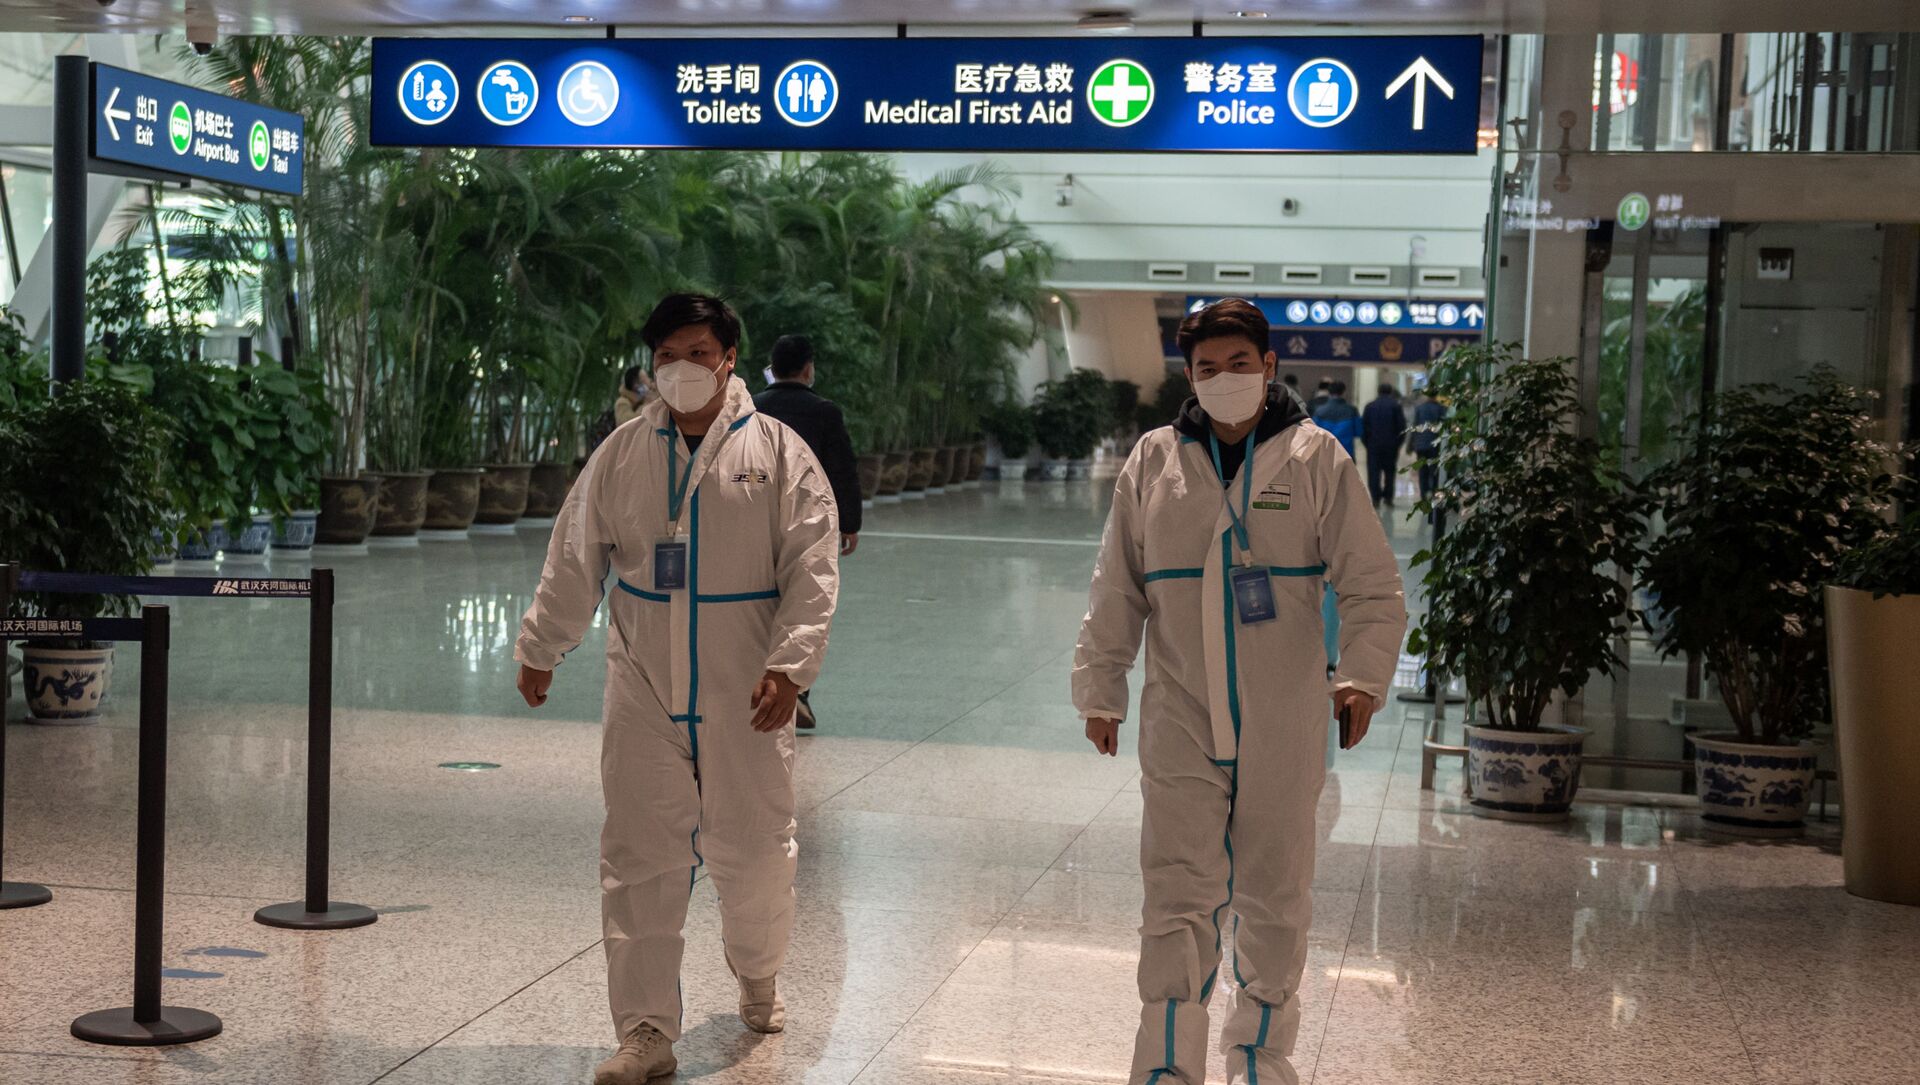 Health workers in suits walk in the international arrivals area, where arriving travelers are to be taken into quarantine, at the international airport in Wuhan on January 14, 2021, ahead of the expected arrival of a World Health Organization (WHO) team investigating the origins of the Covid-19 pandemic. - Sputnik International, 1920, 08.02.2021